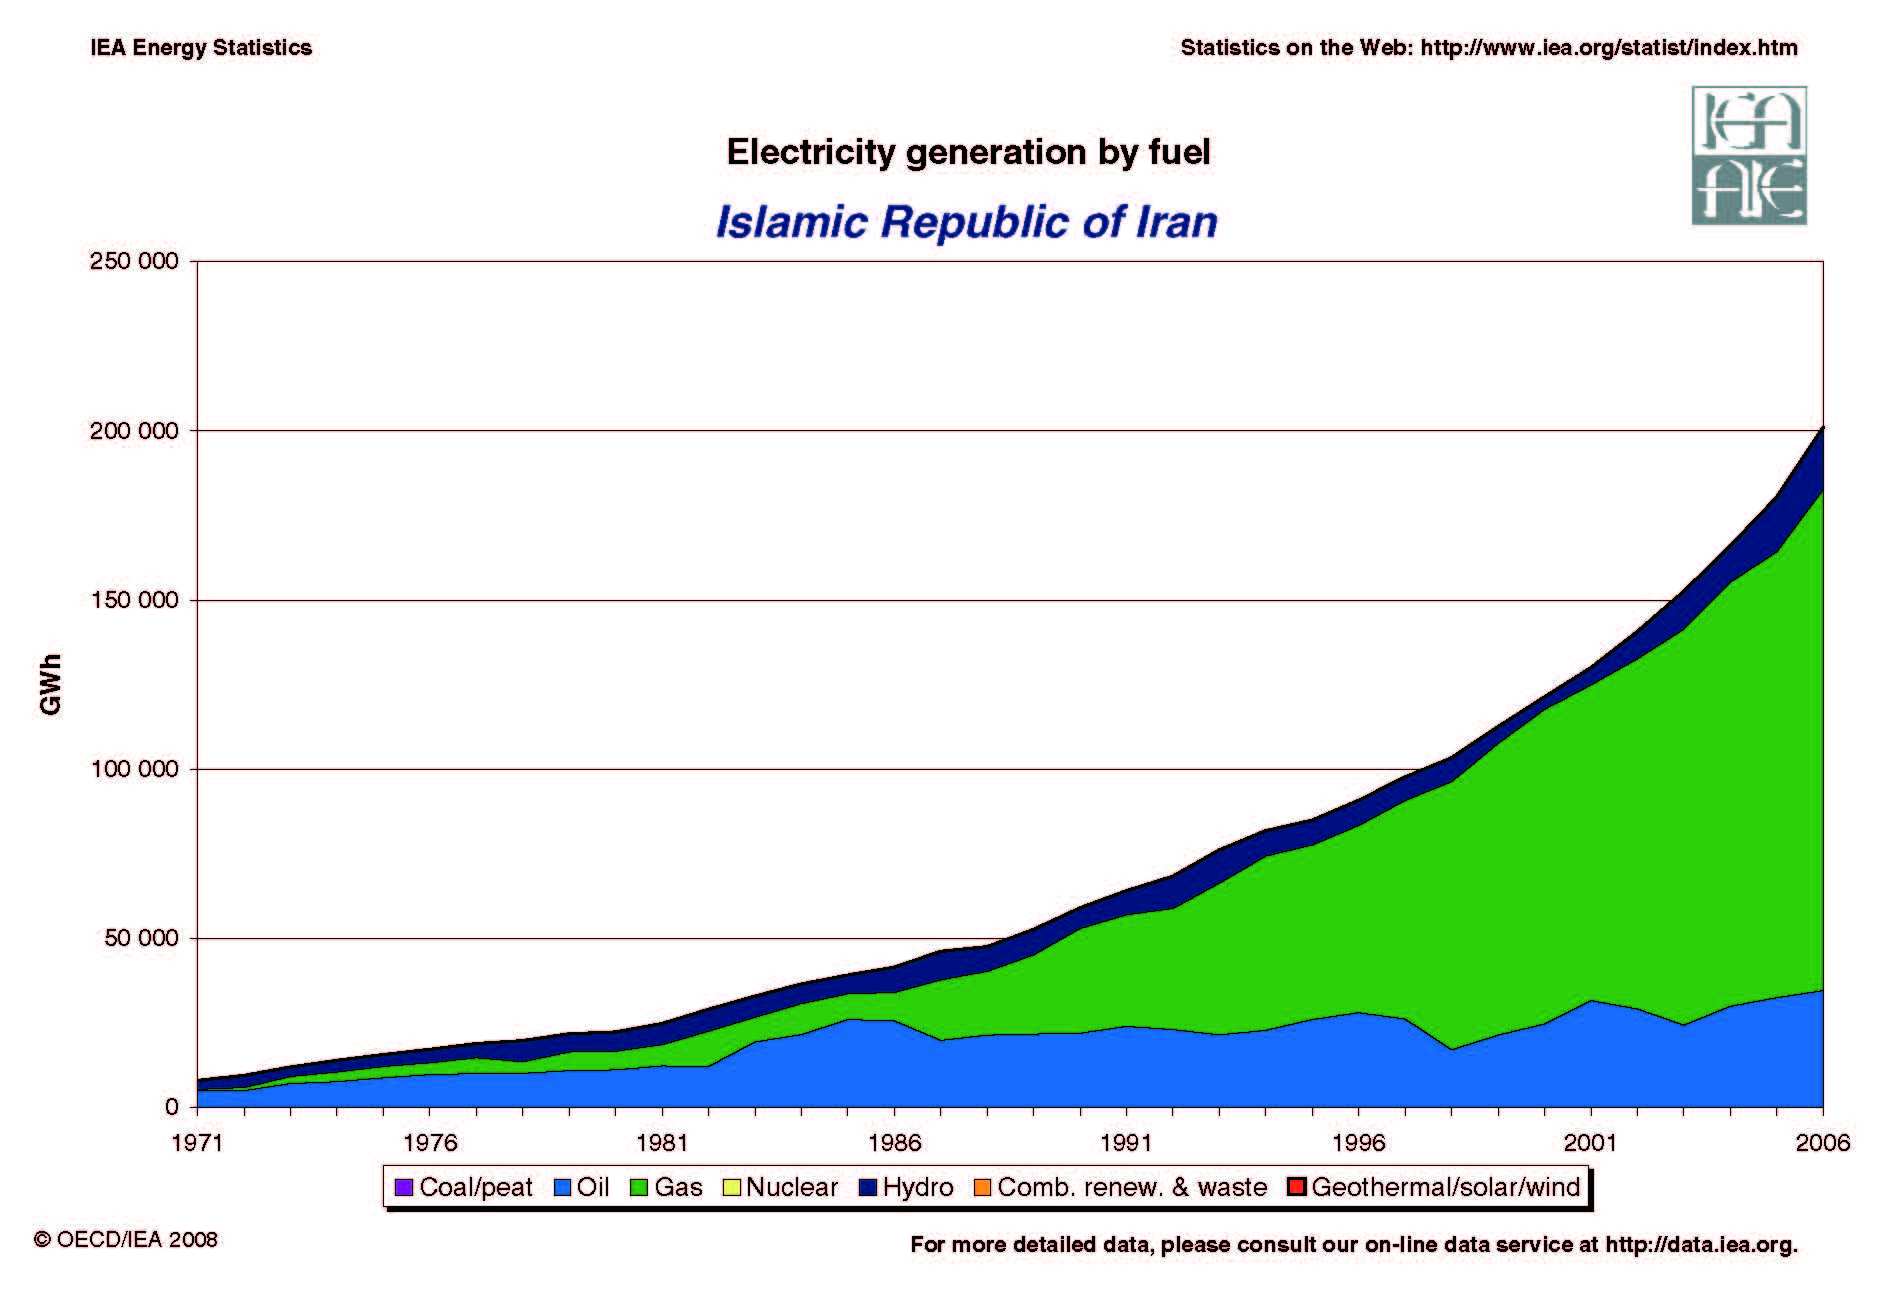 Electricity generation by fuel - Iran